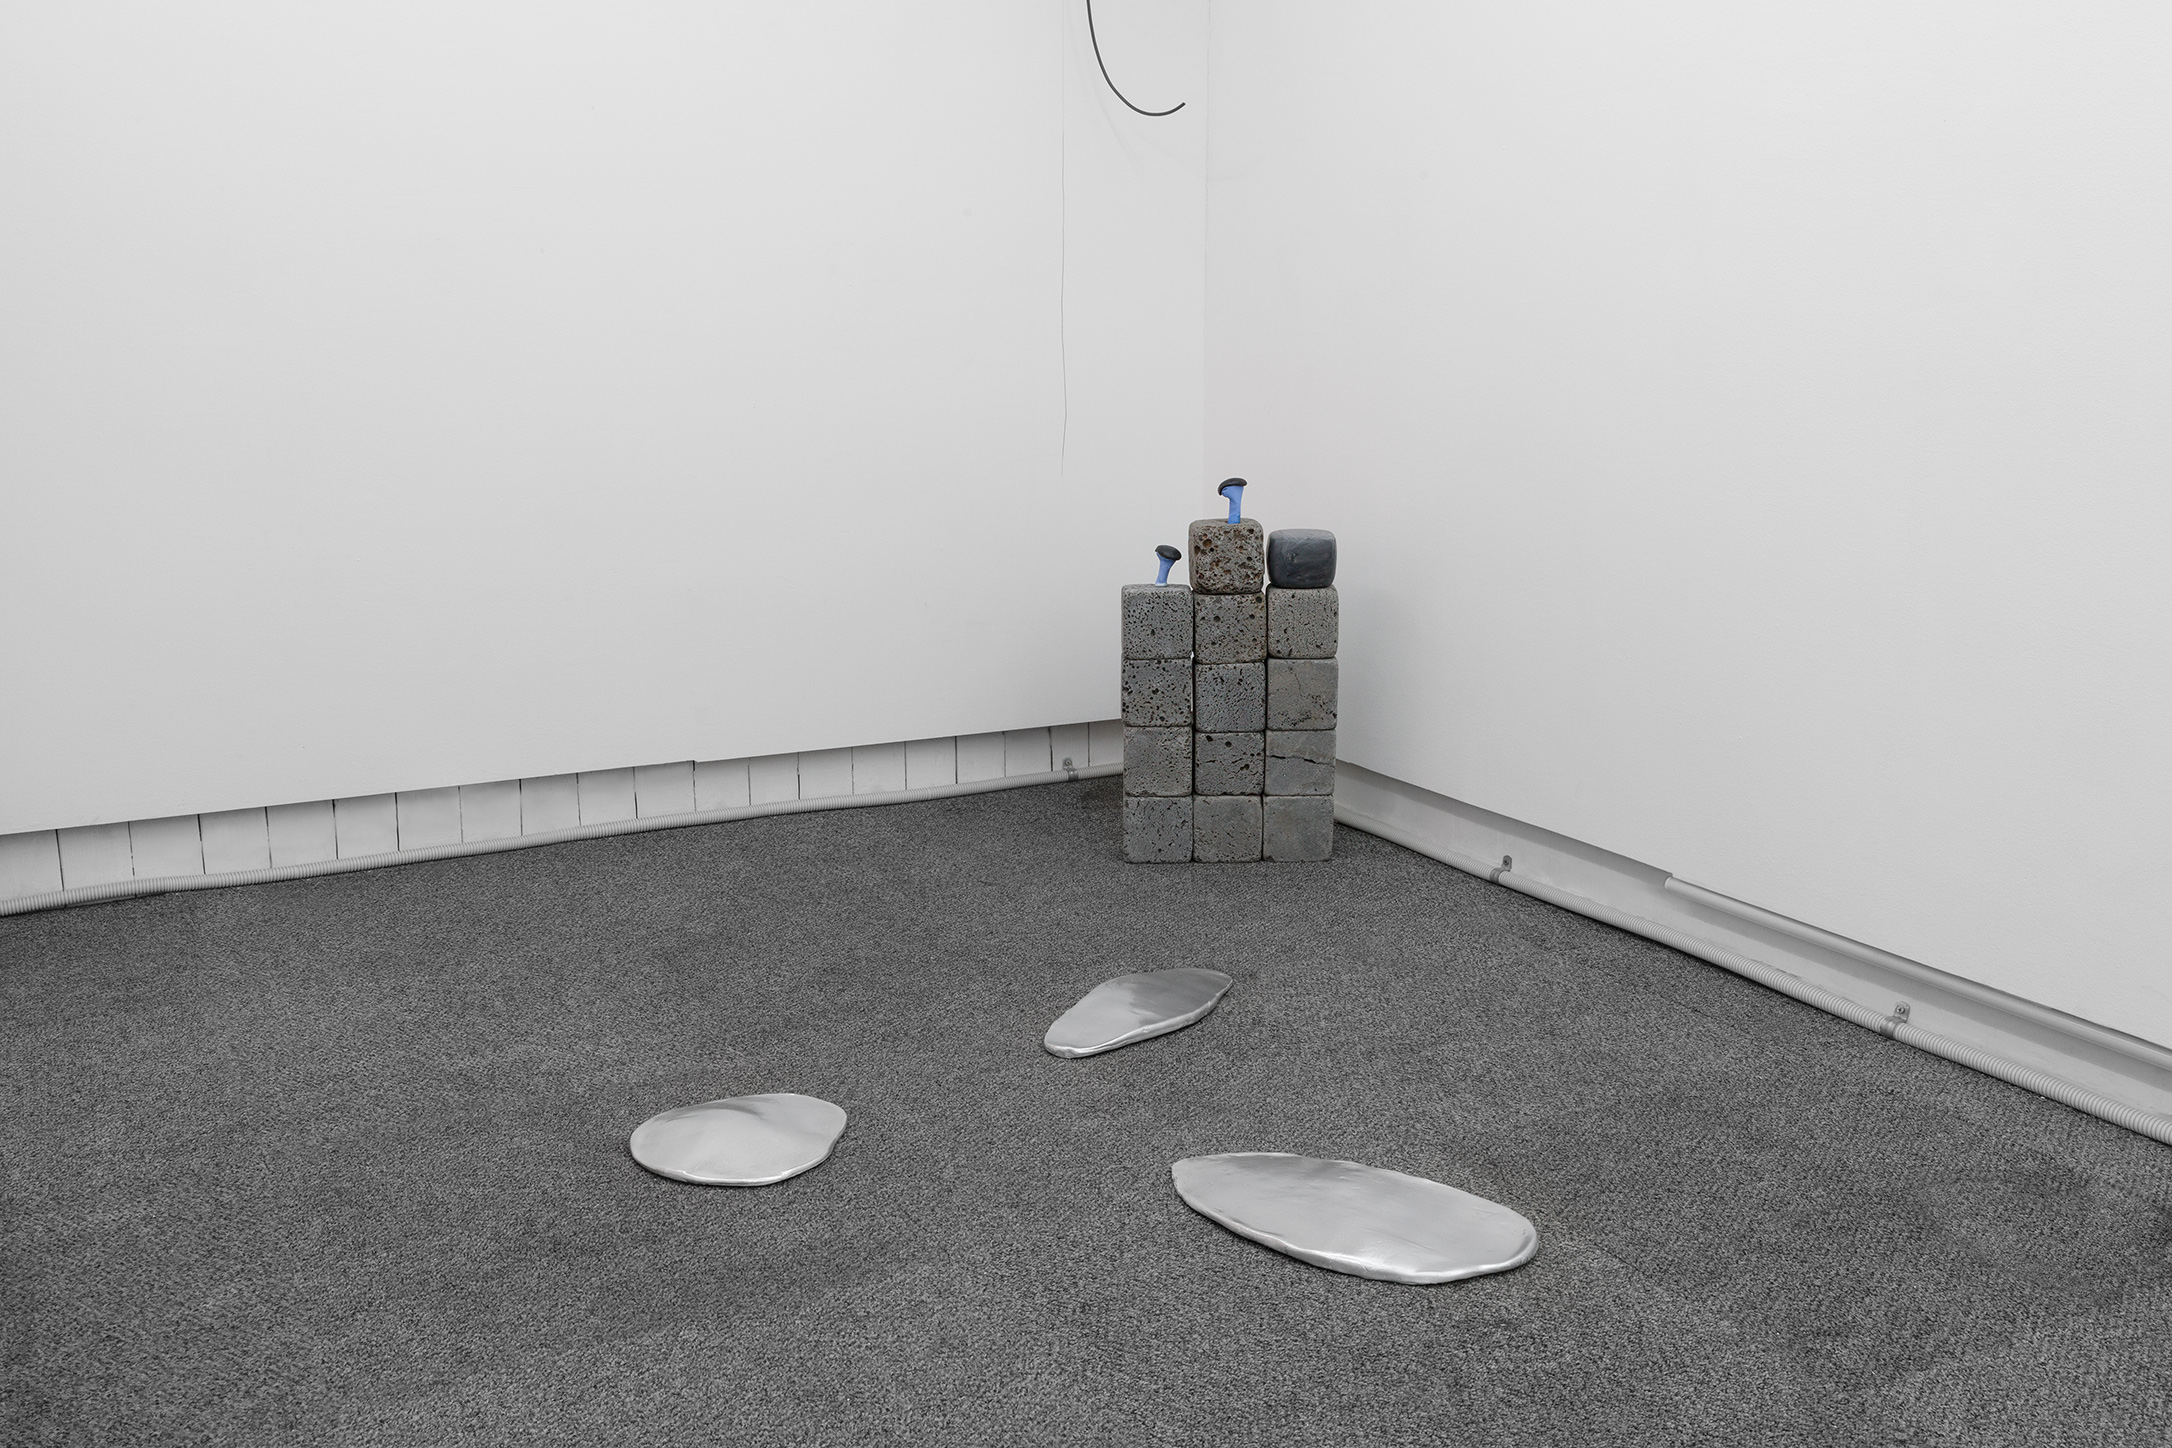 clay,brick,rubber,plaster_dimensions variable_2018